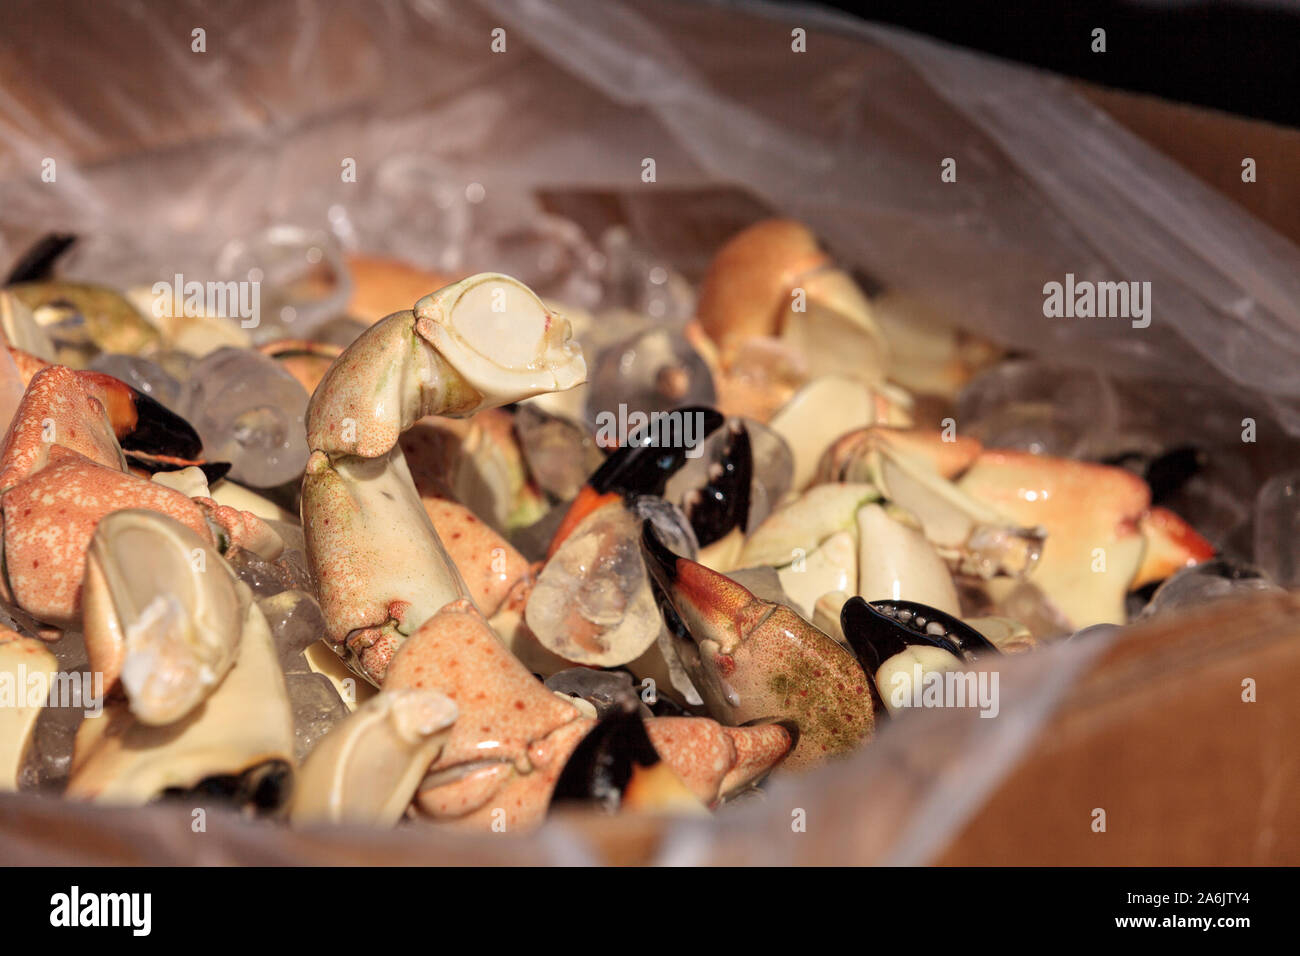 Florida Stone crab Menippe mercenaria steam cooked for lunch at a picnic festival. Stock Photo